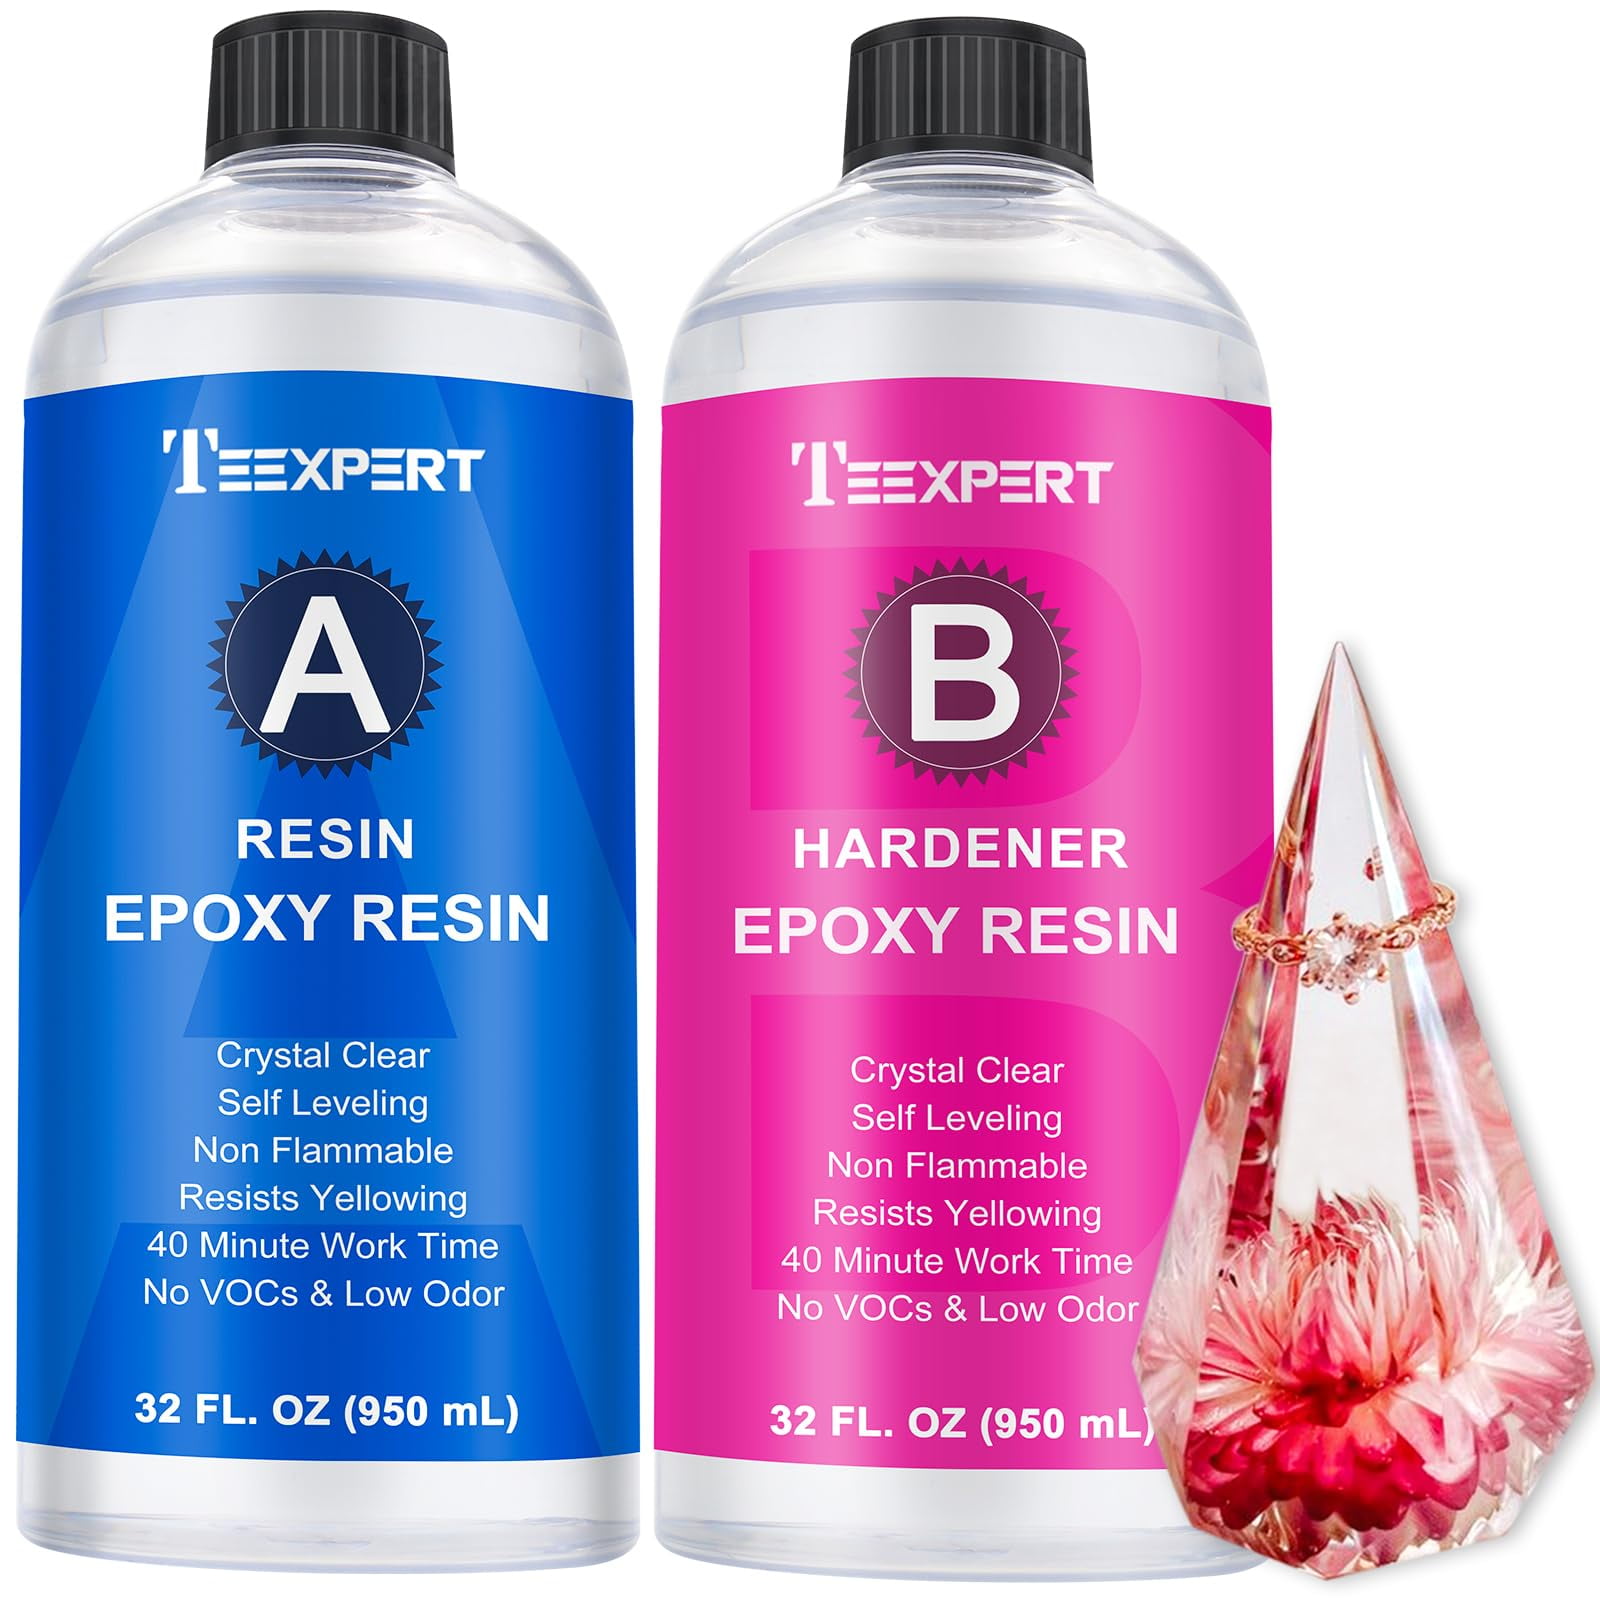 Teexpert Epoxy Resin-76OZ Fast Curing Epoxy Resin 4 Hours Demold Crystal Clear & Self-Leveling Coating and Casting Resin 38oz Resin and 38oz